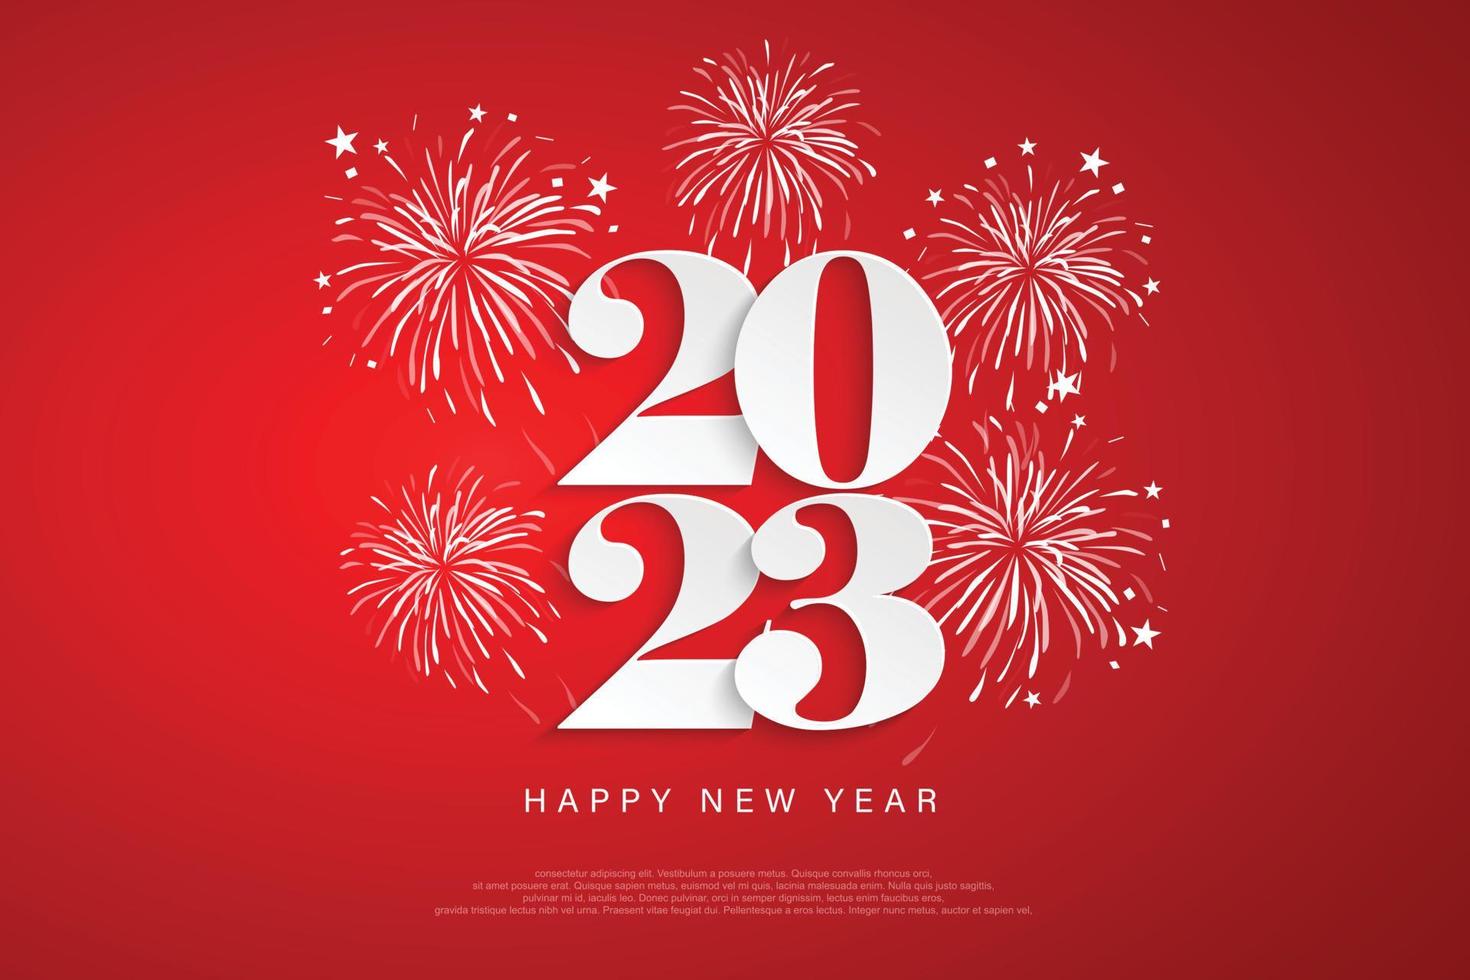 Happy New Year 2023 number design for posters, brochures, banners, websites, on red background and fireworks. Vector illustration